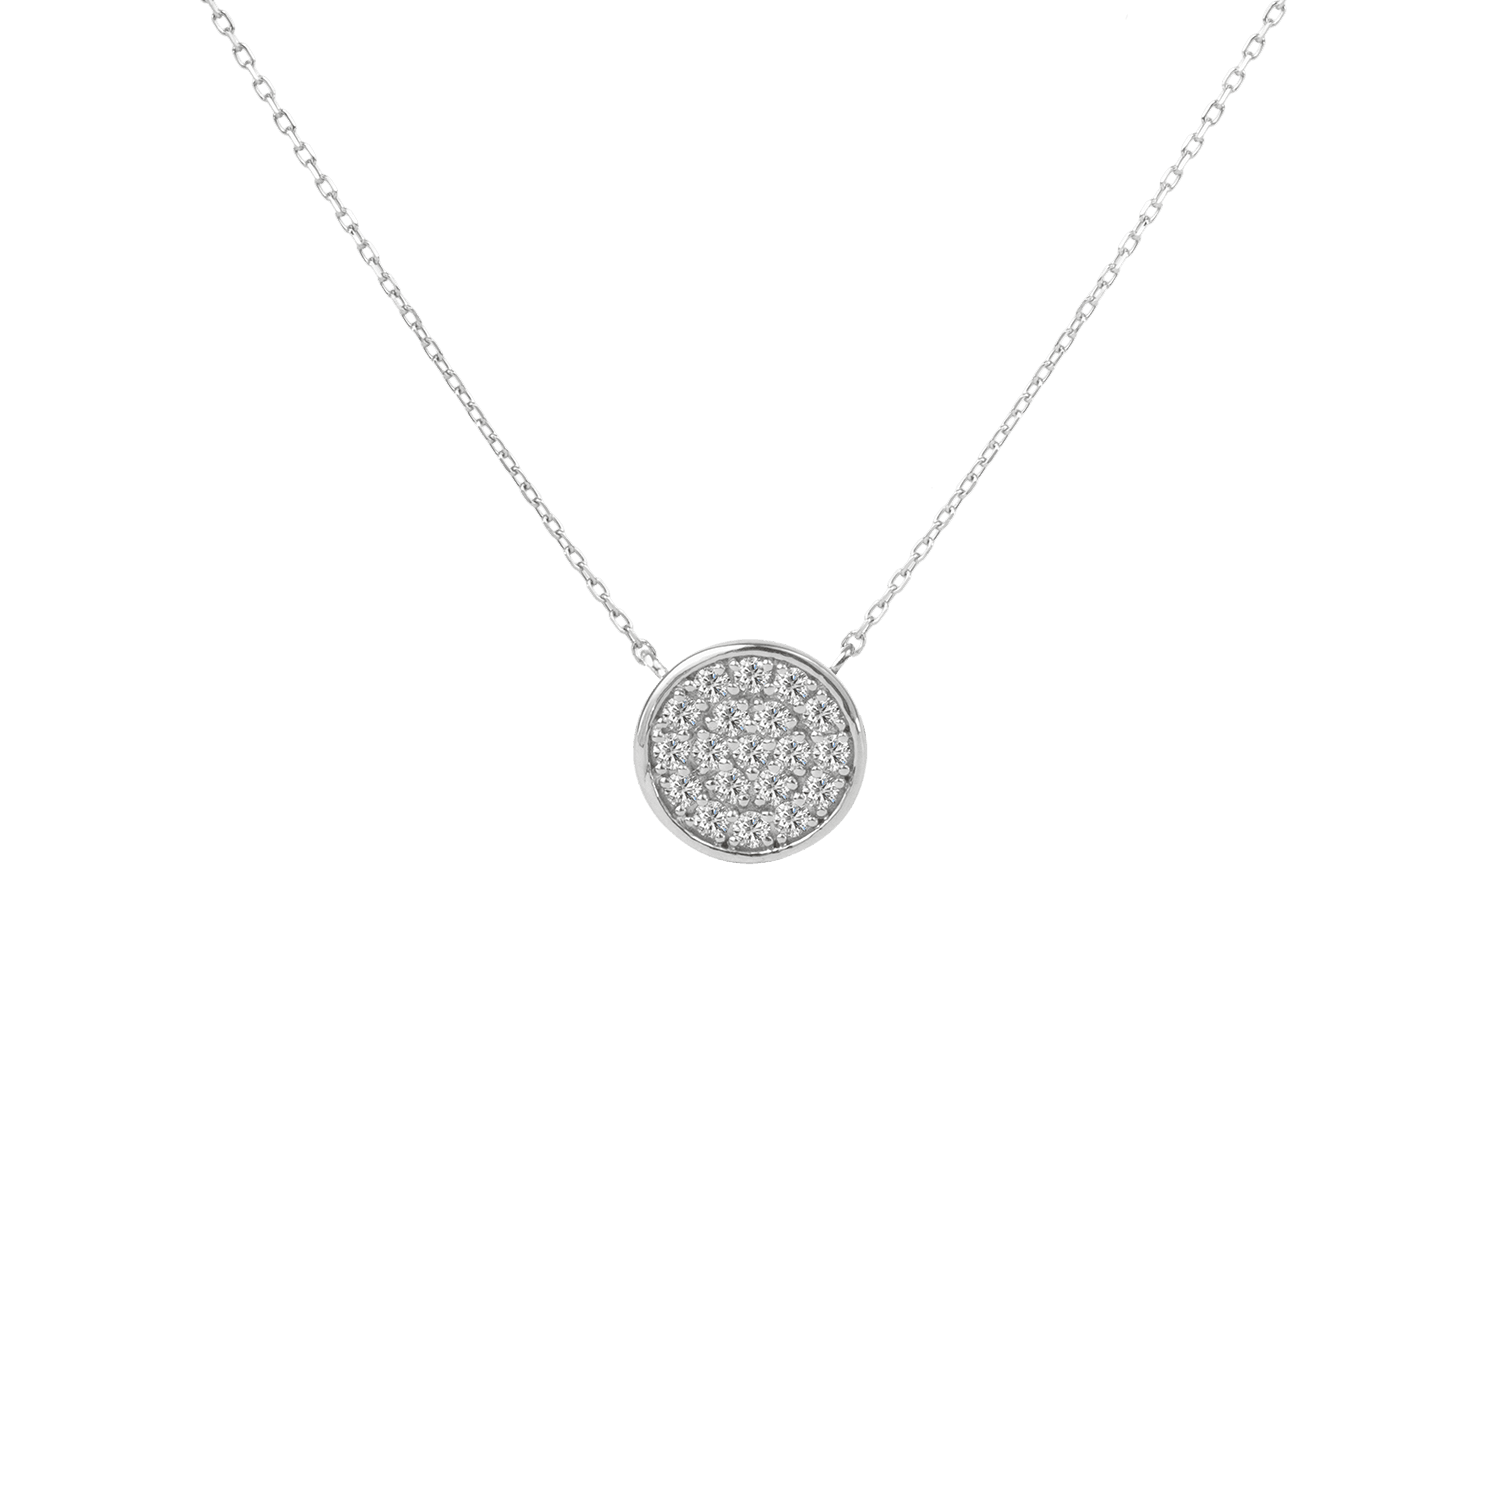 Pave Diamond Disk Necklace | 18K white gold / Chain length 420 mm / 16.2 in / 0.19ct  | Jewelry | The Future Rocks